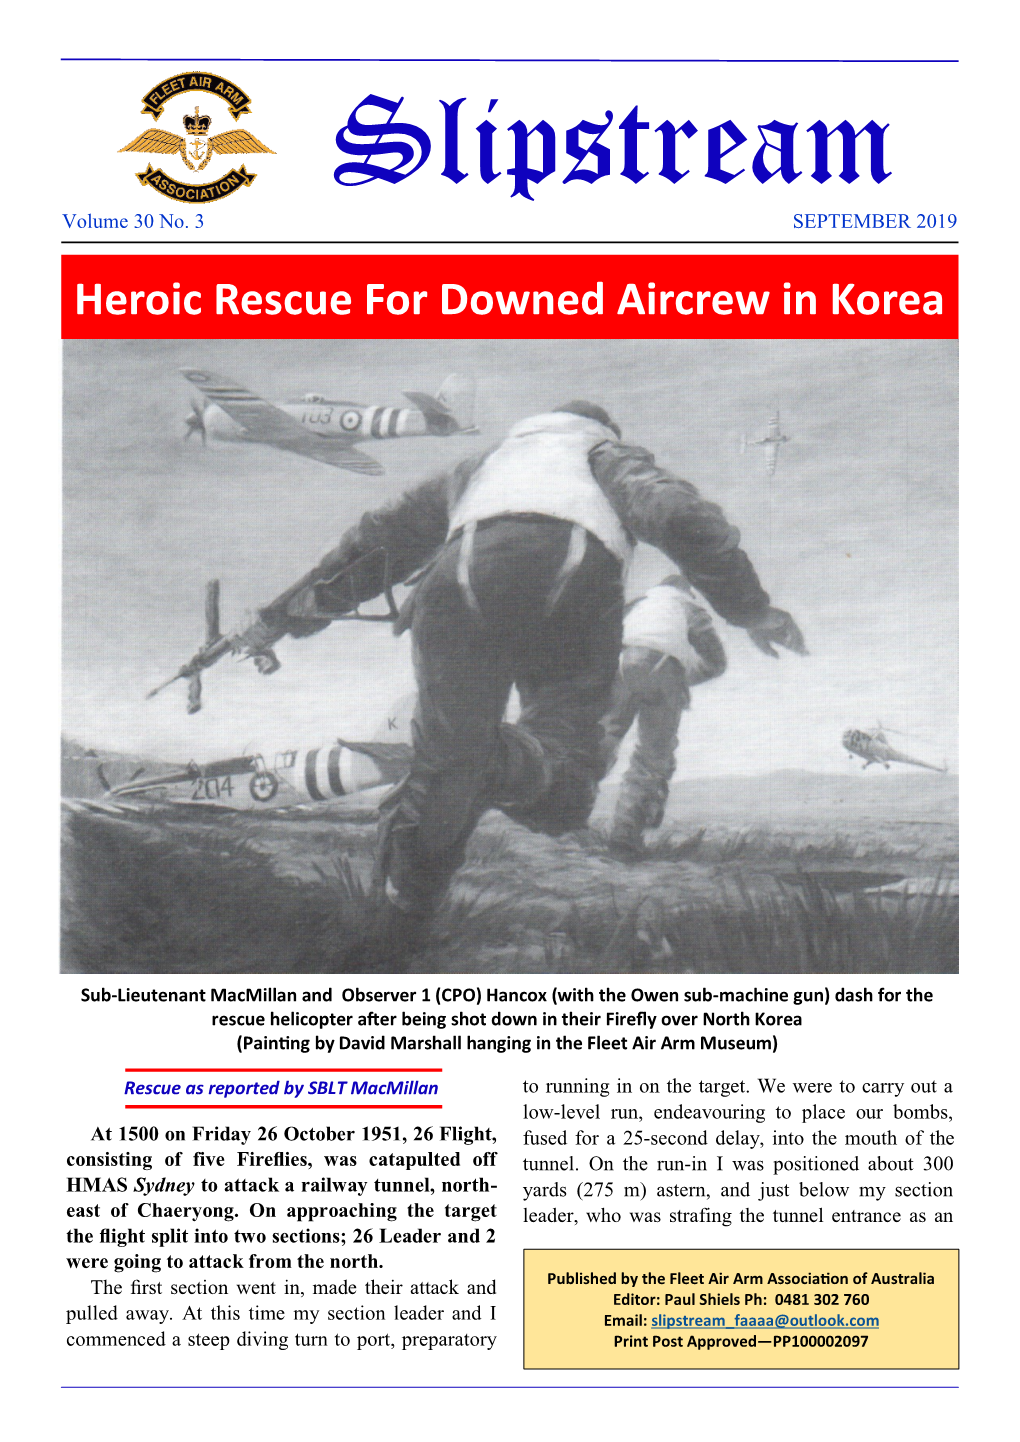 Heroic Rescue for Downed Aircrew in Korea